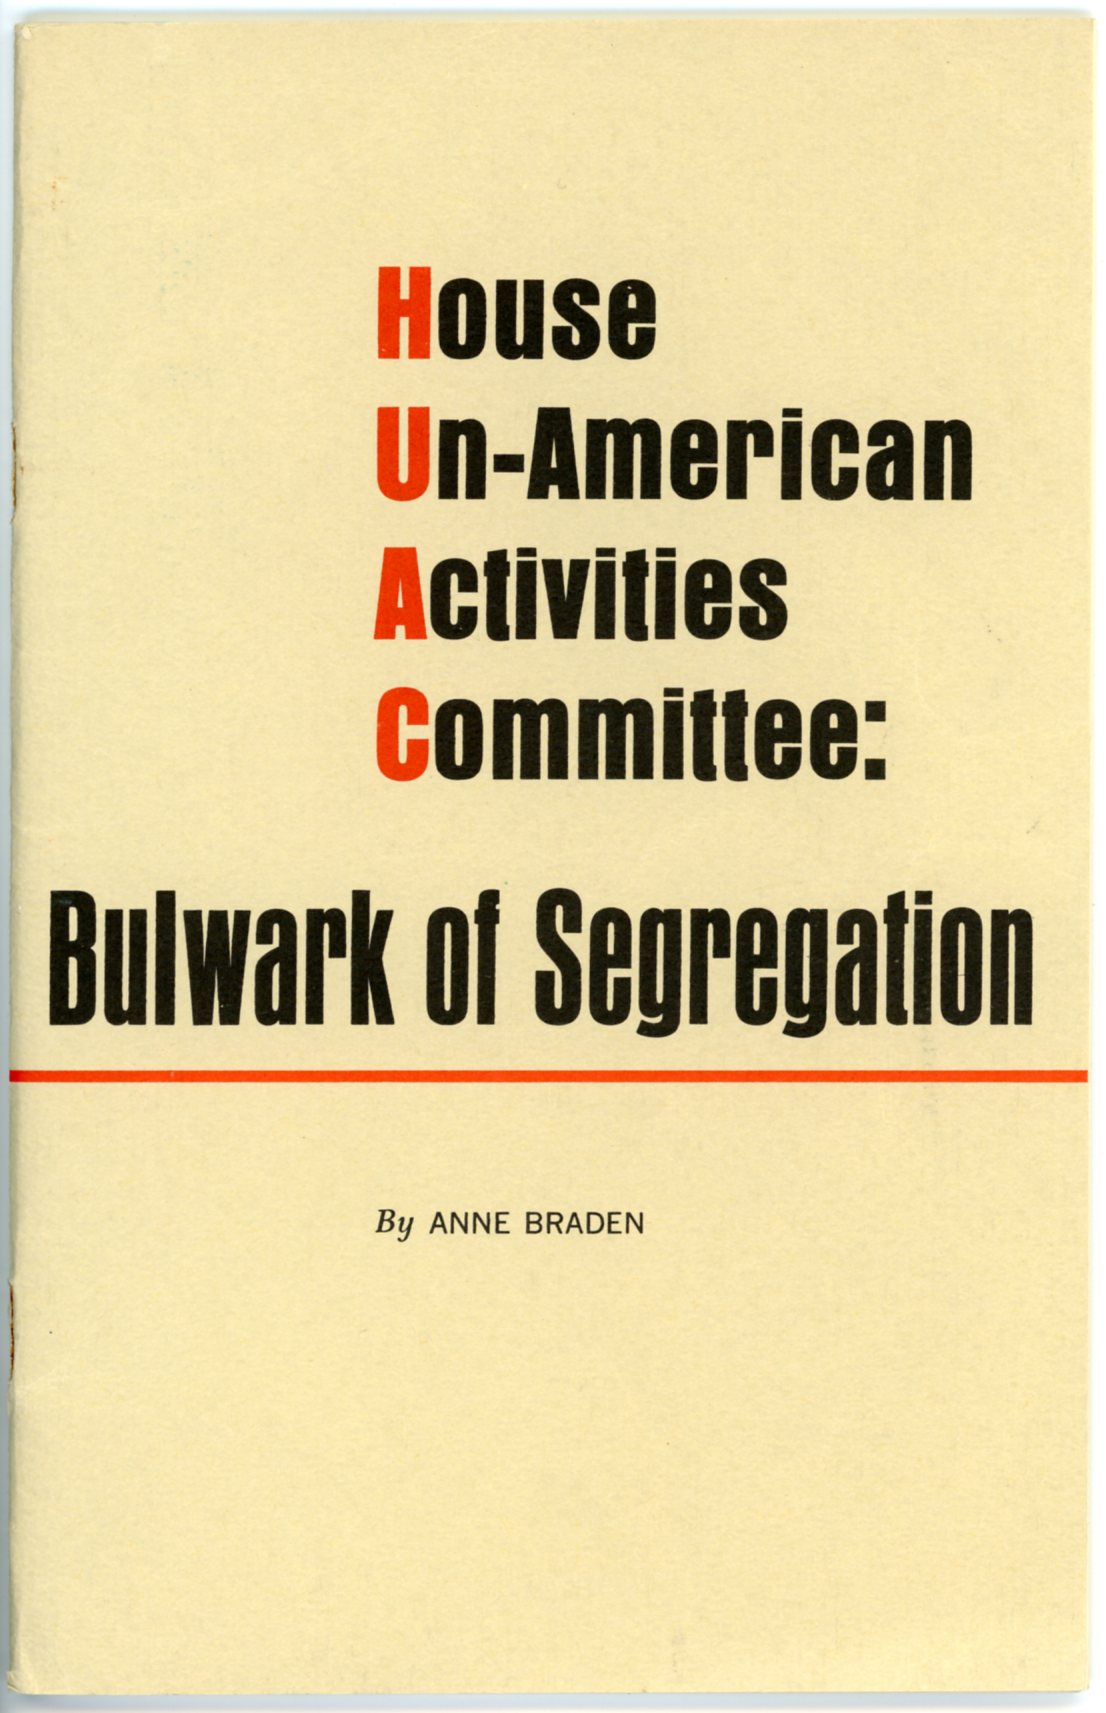 Cover of pamphlet "House Un-American Activities Committee: Bulwark of Segregation" by Anne Braden